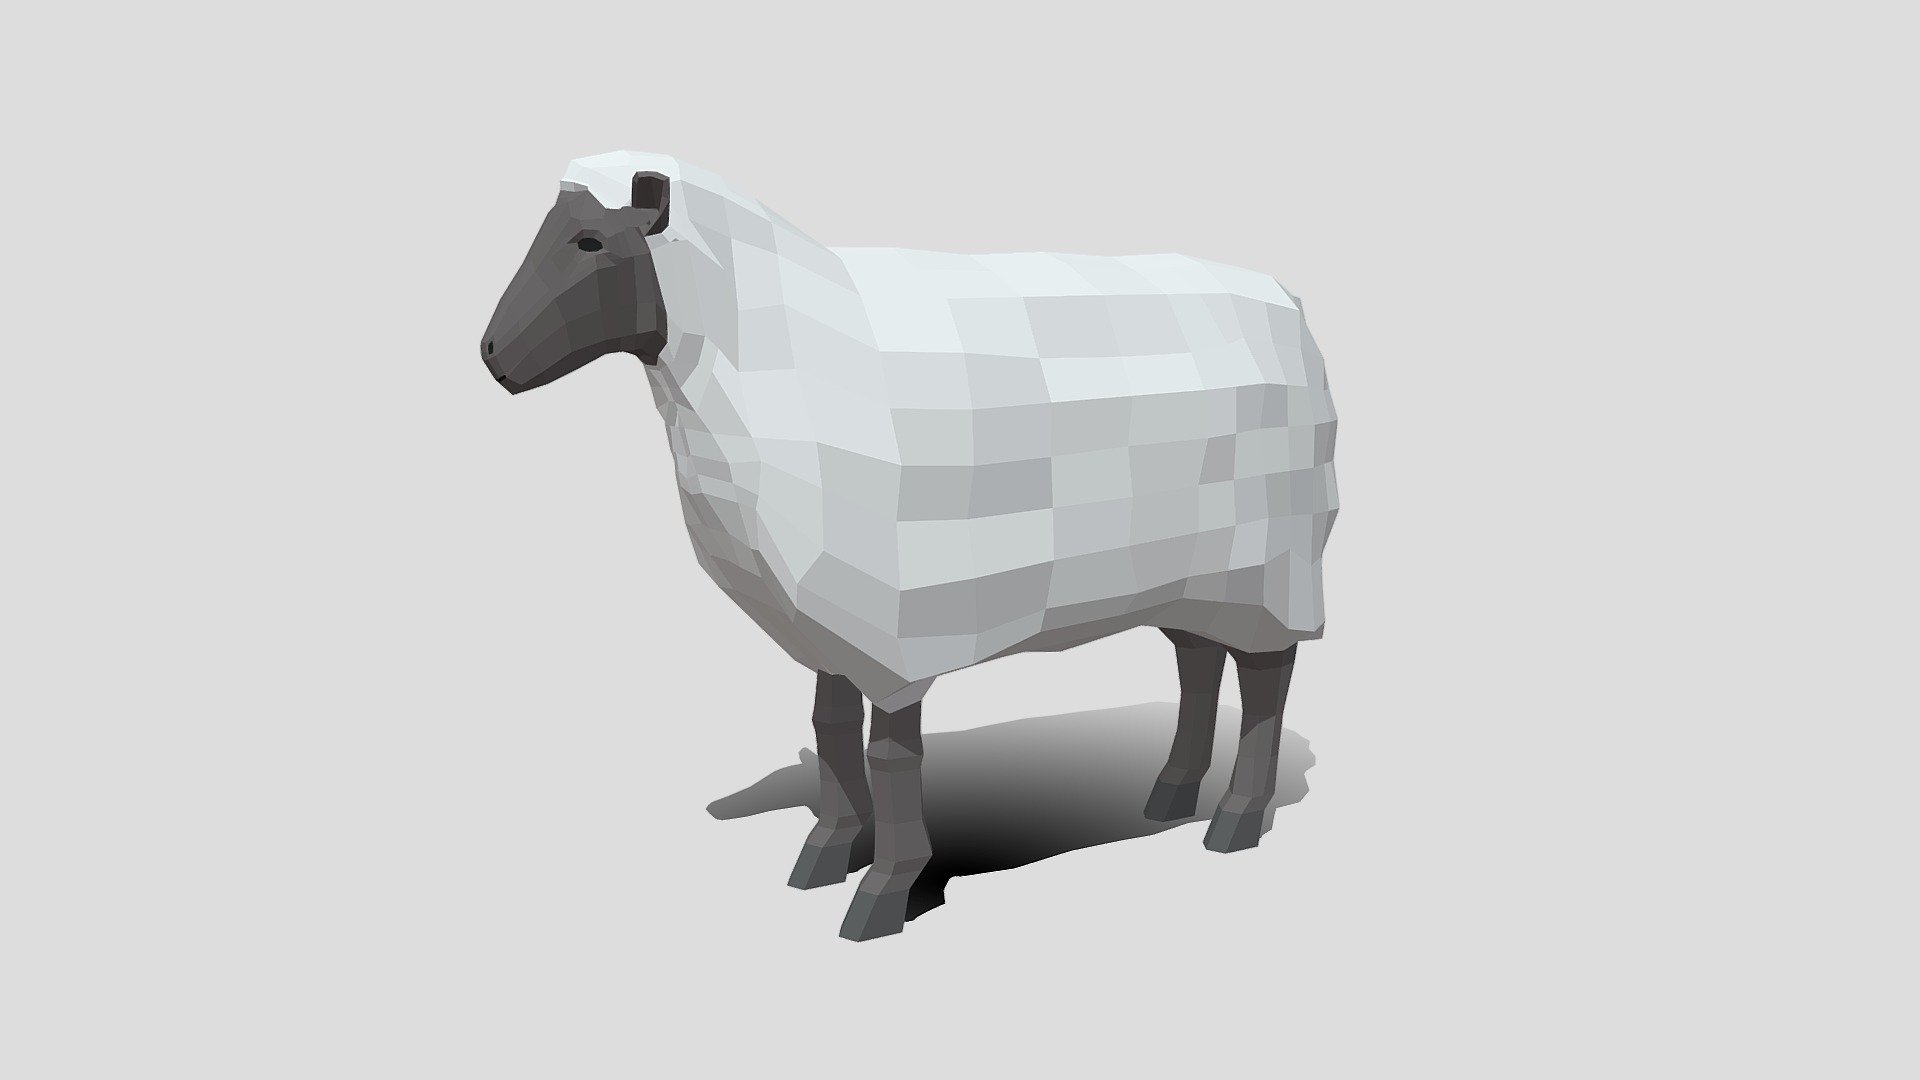 This is a low poly 3d model of a sheep. The low poly sheep was modelled and prepared for low-poly style renderings, background, general CG visualization.

The 3d sheep model is presented as a mesh with quads only.

Verts : 992 Faces: 990

Simple diffuse colors.

No ring, maps and no UVW mapping is available.

The original file was created in blender. You will receive a 3DS, OBJ, FBX, blend, DAE, Stl.

All preview images were rendered with Blender Cycles. Product is ready to render out-of-the-box. Please note that the lights, cameras, and background is only included in the .blend file. The model is clean and alone in the other provided files, centred at origin and has real-world scale 3d model